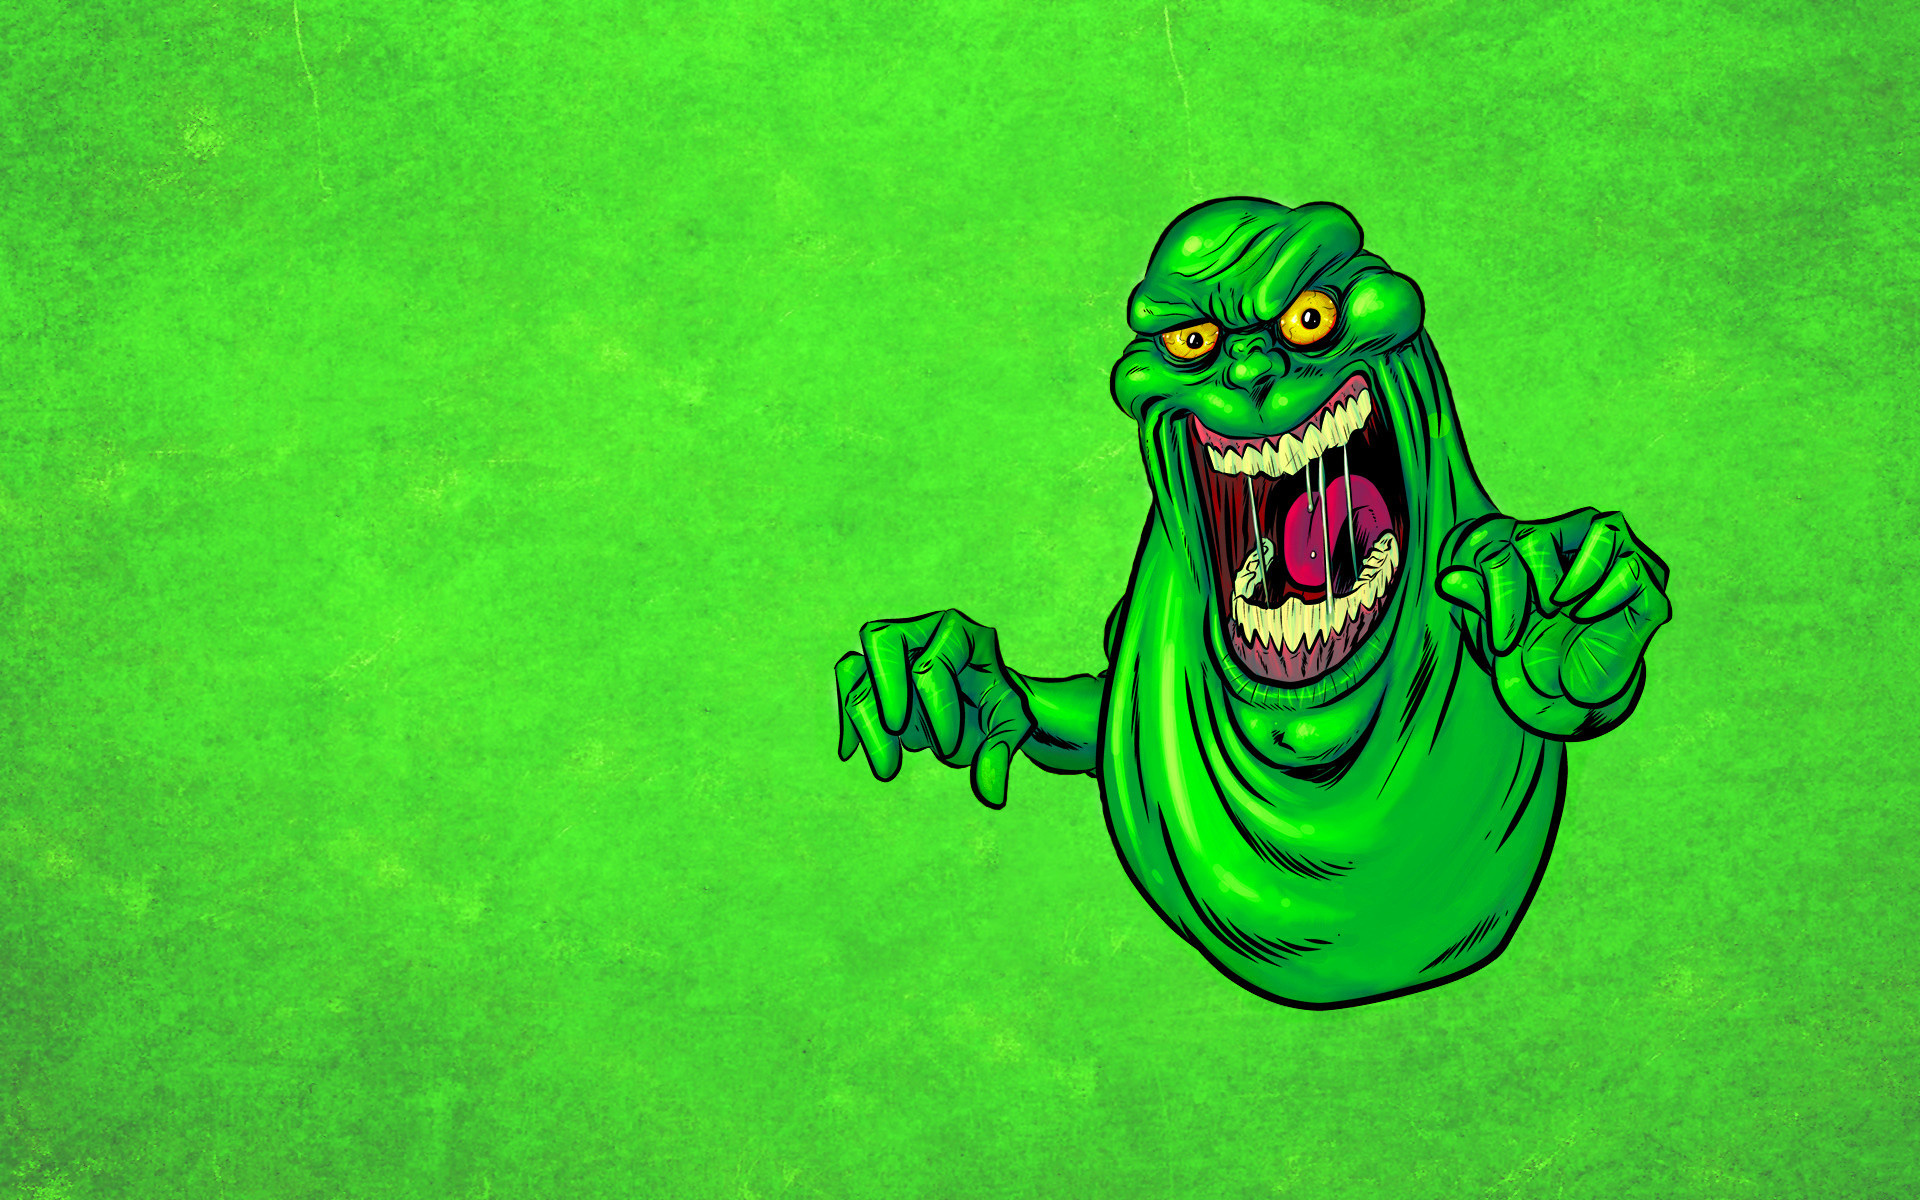 Related Wallpapers from Silver Surfer Wallpaper. Slimer ghostbusters